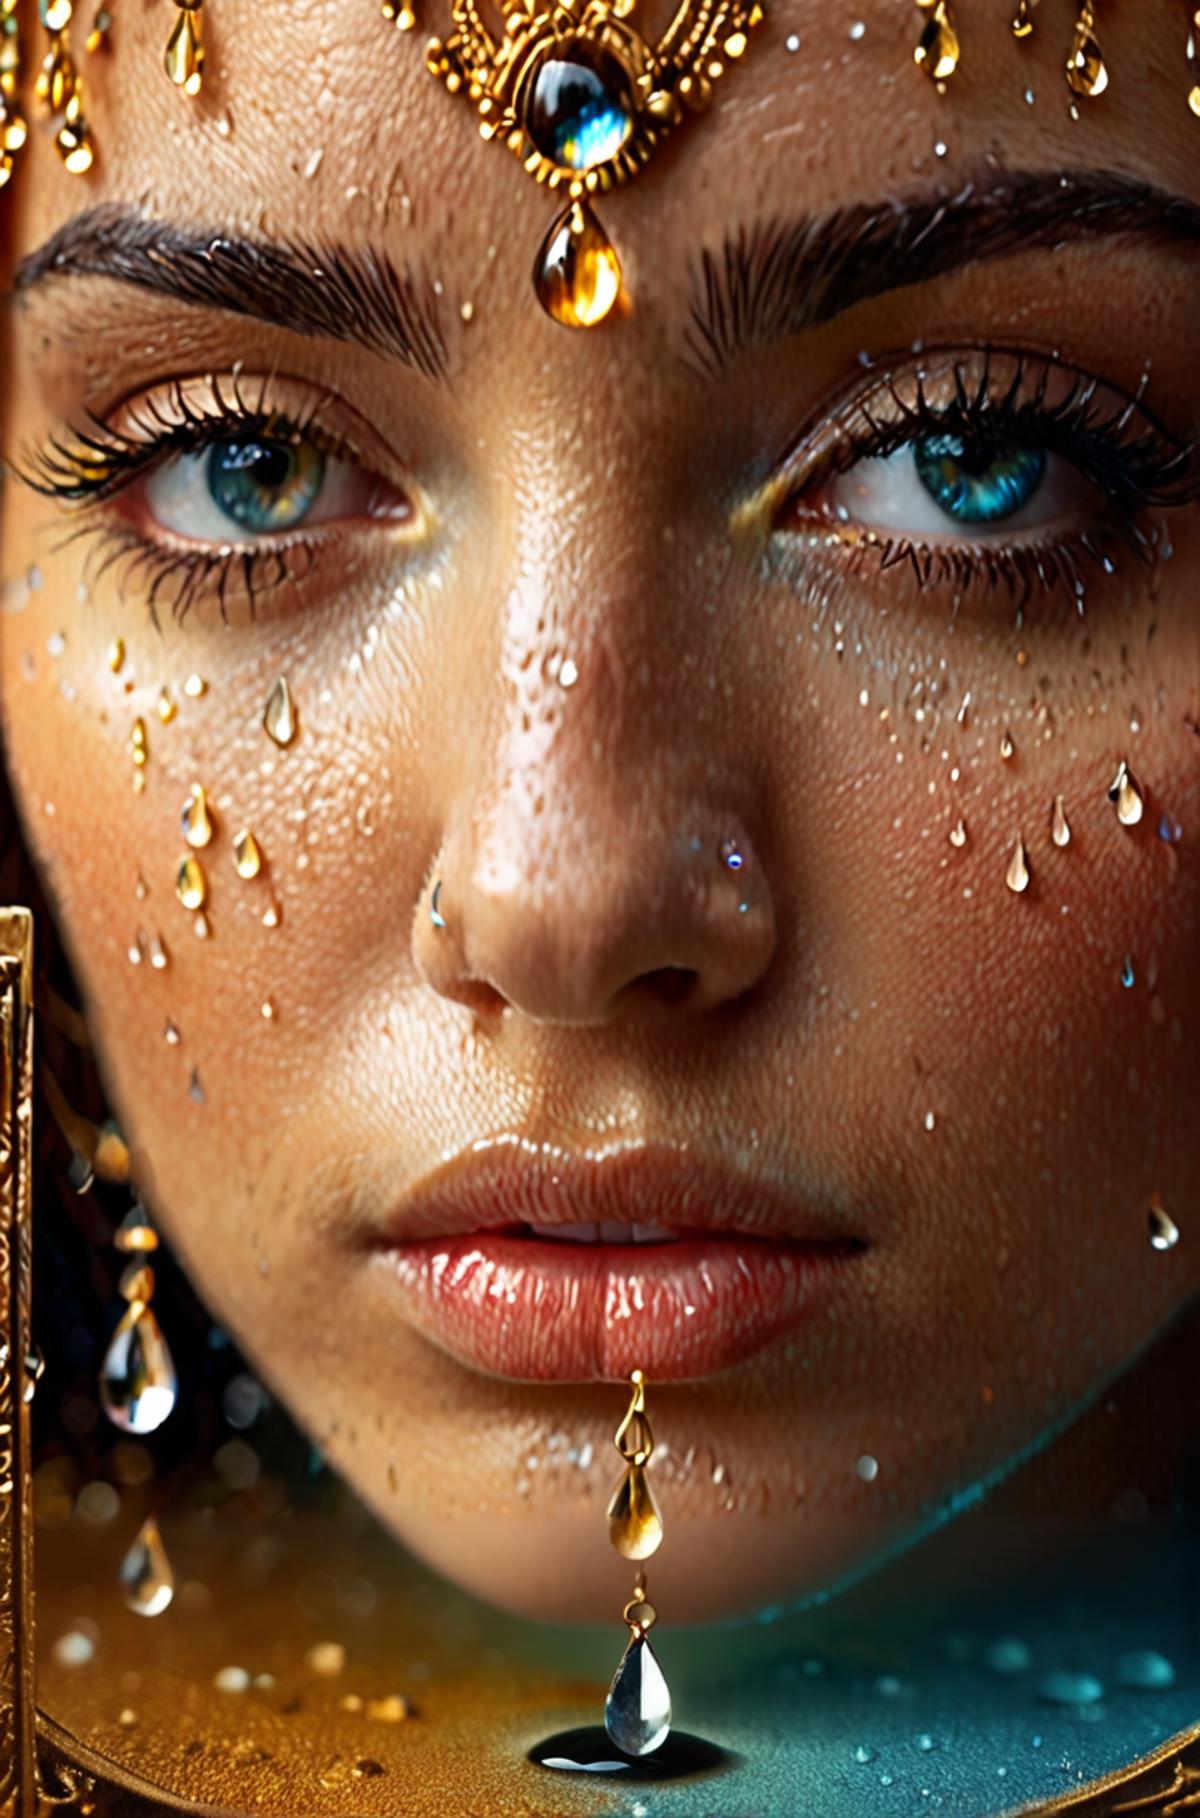 A young woman with blue eyes and a nose piercing has water droplets on her face.